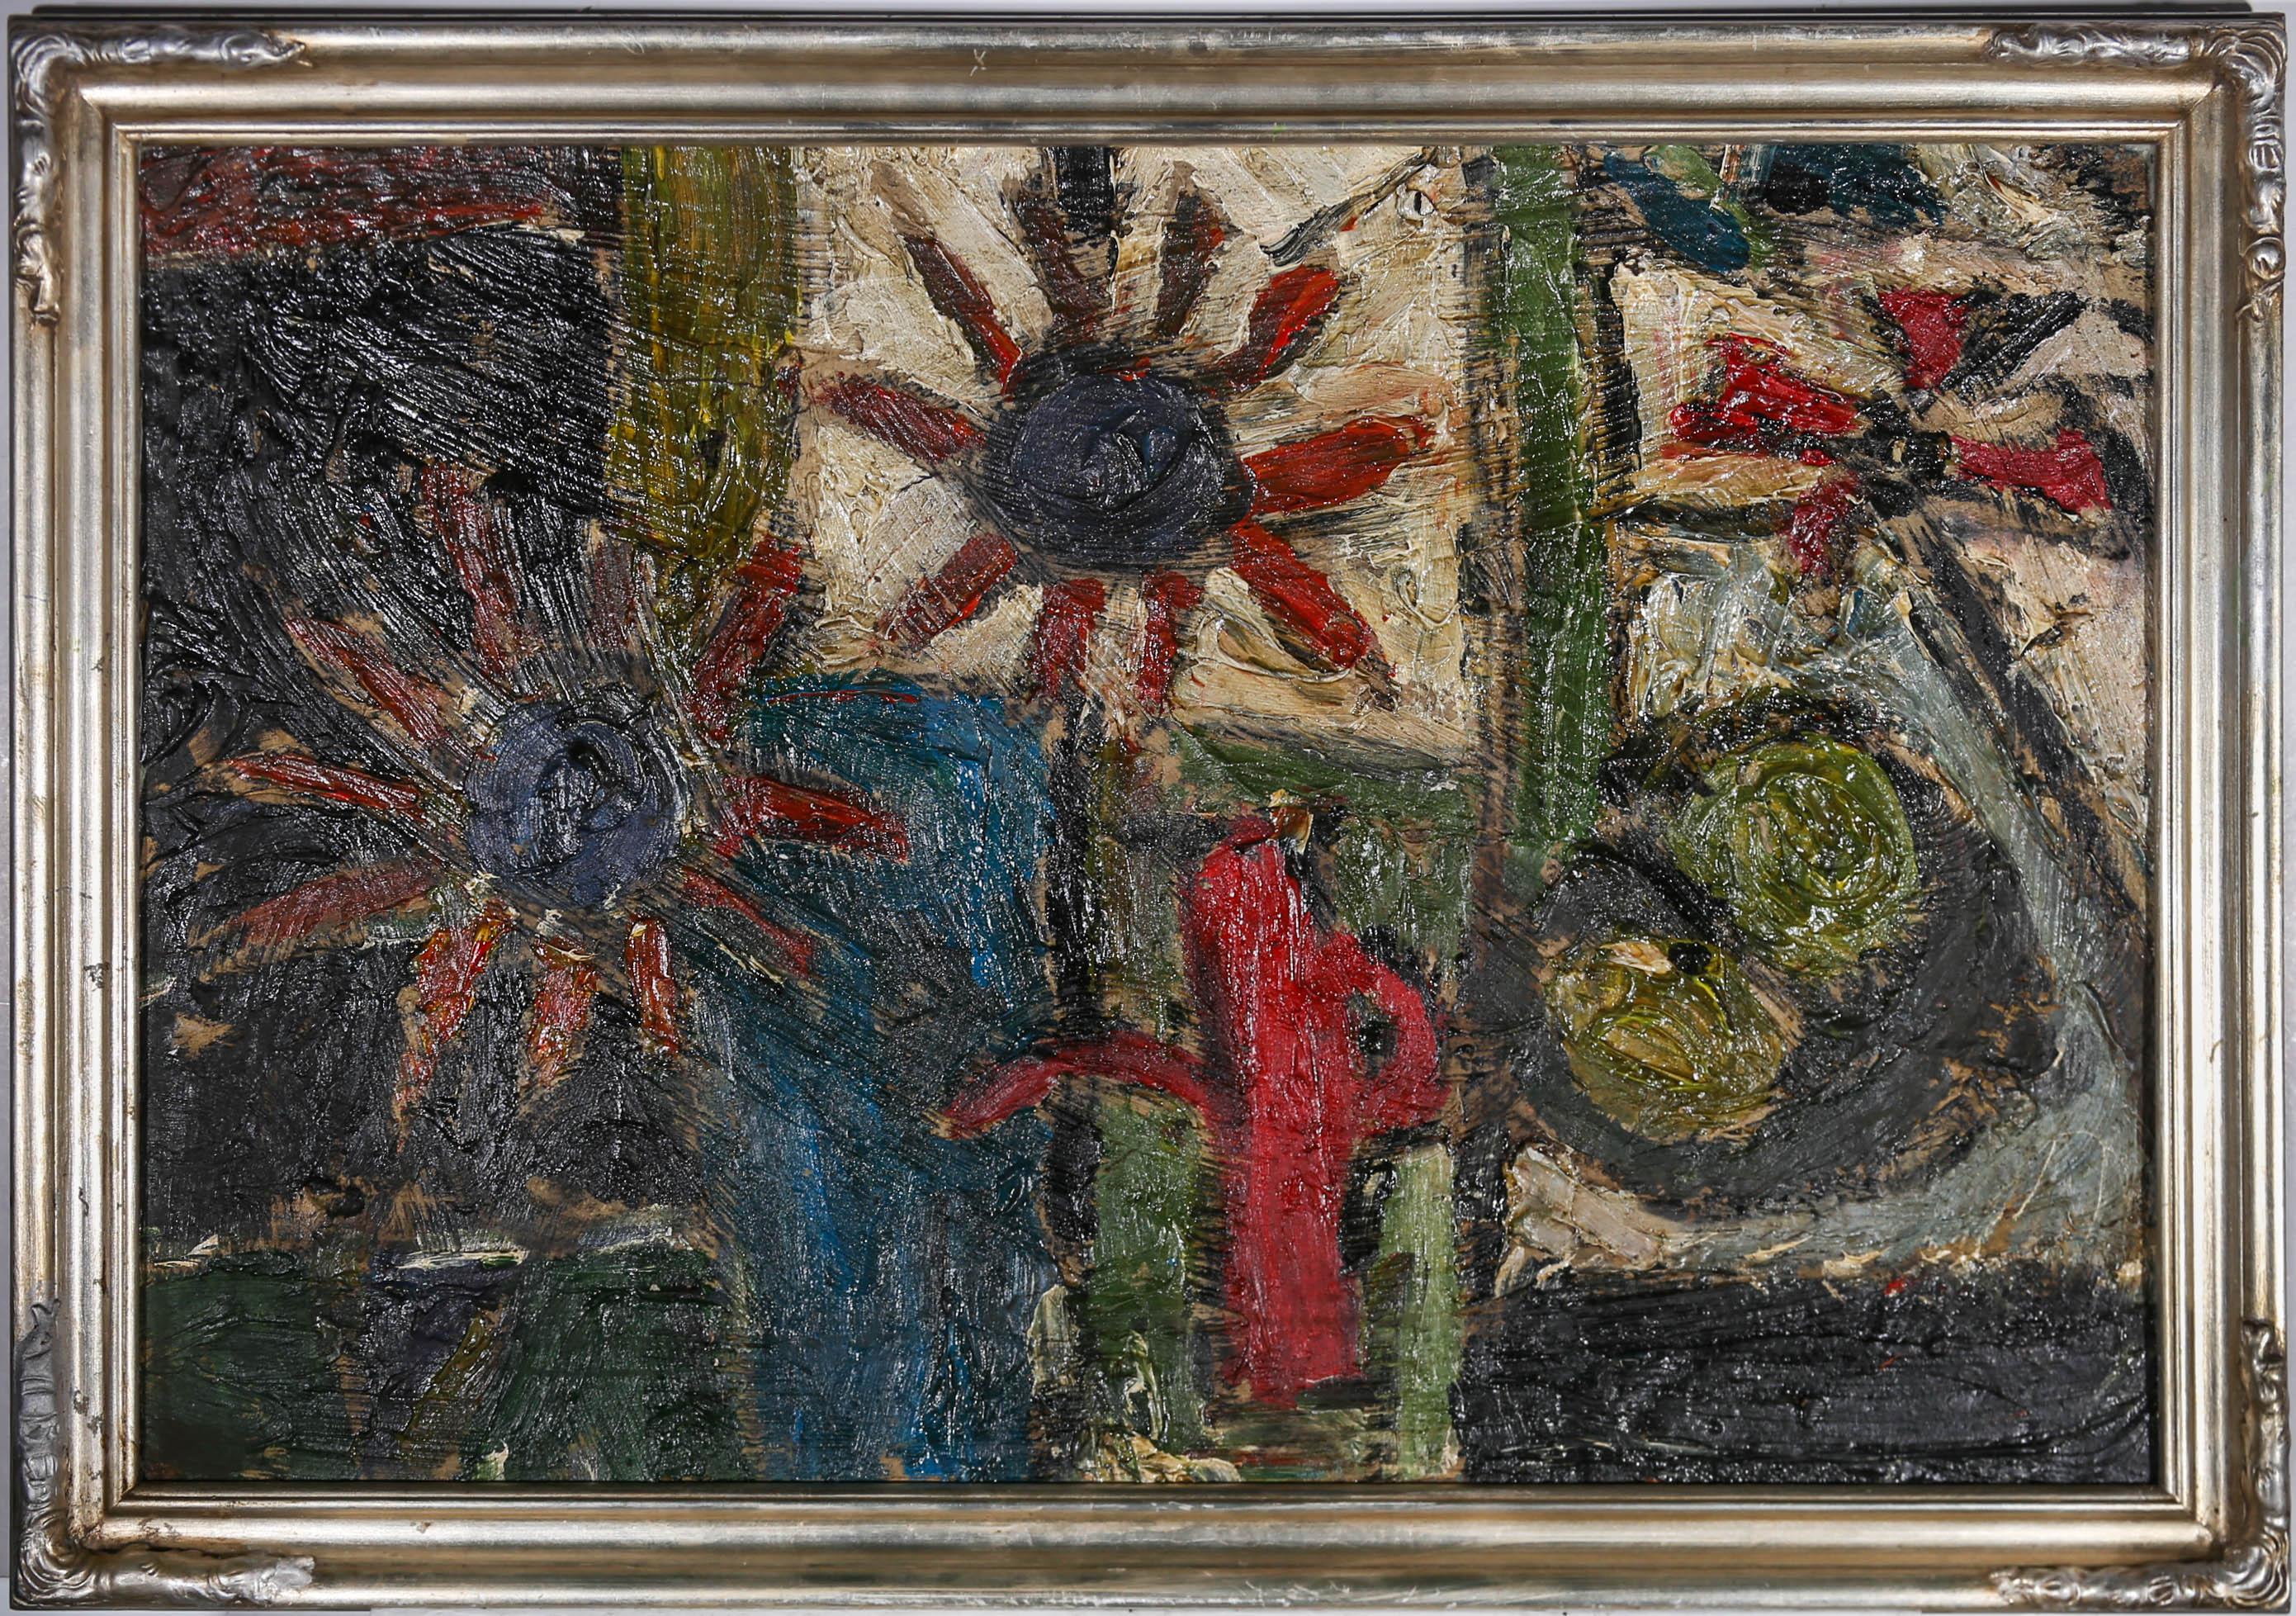 A striking 20th Century still life in confident semi abstracted impasto oil. The artist has used a heavily impasto ground to apply the paint to, adding depth and movement to the piece. The painting has been presented in a 20th Century silver gilt